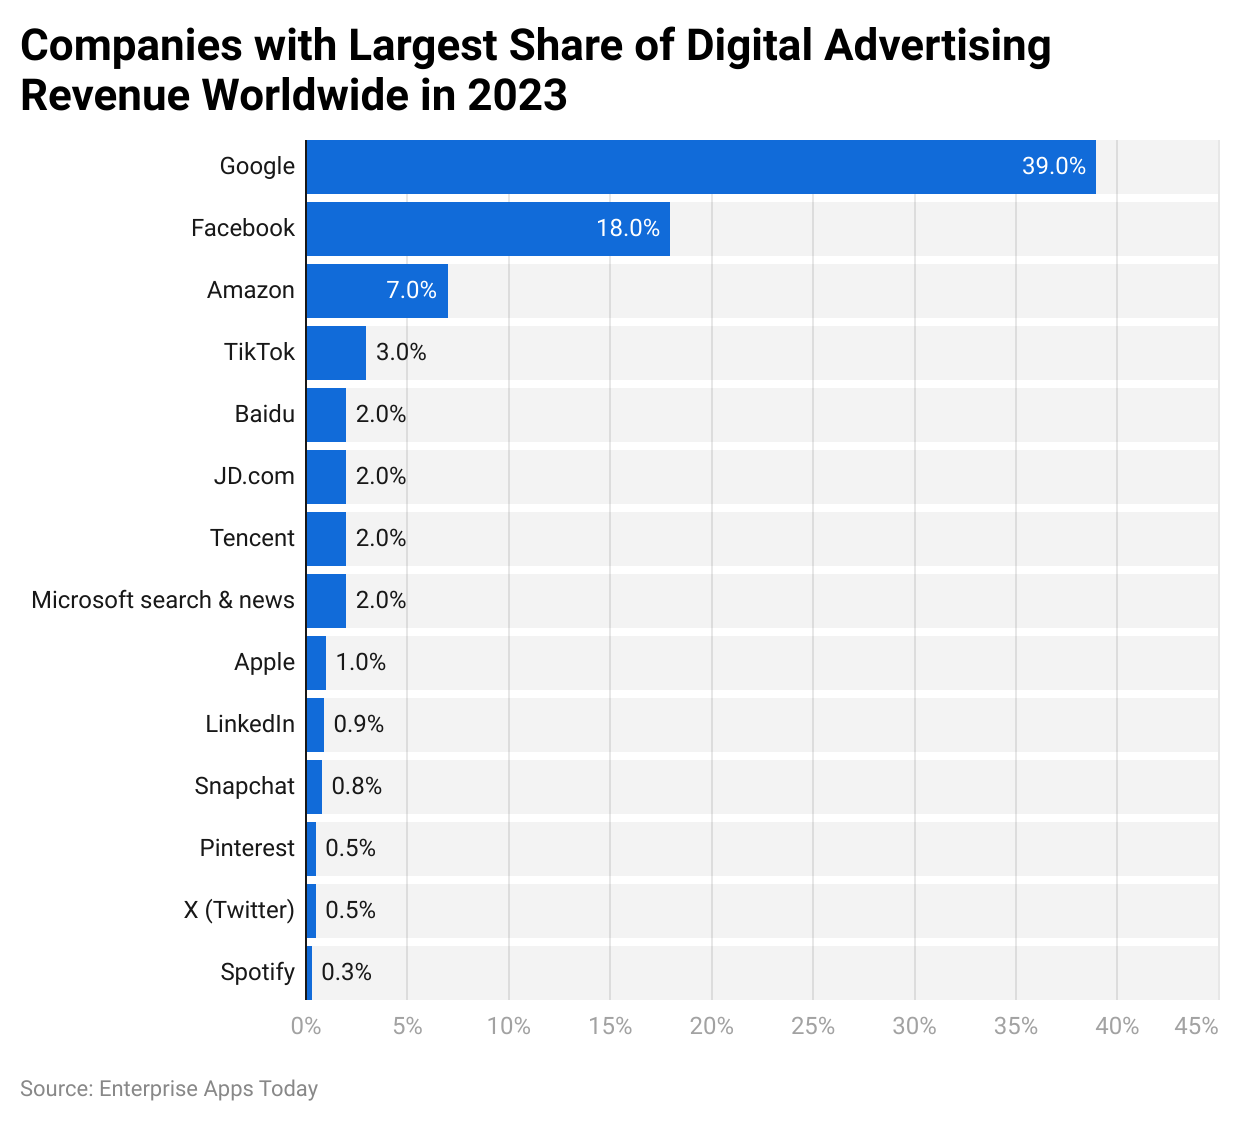 Companies with largest share of digital advertising revenue worldwide in 2023